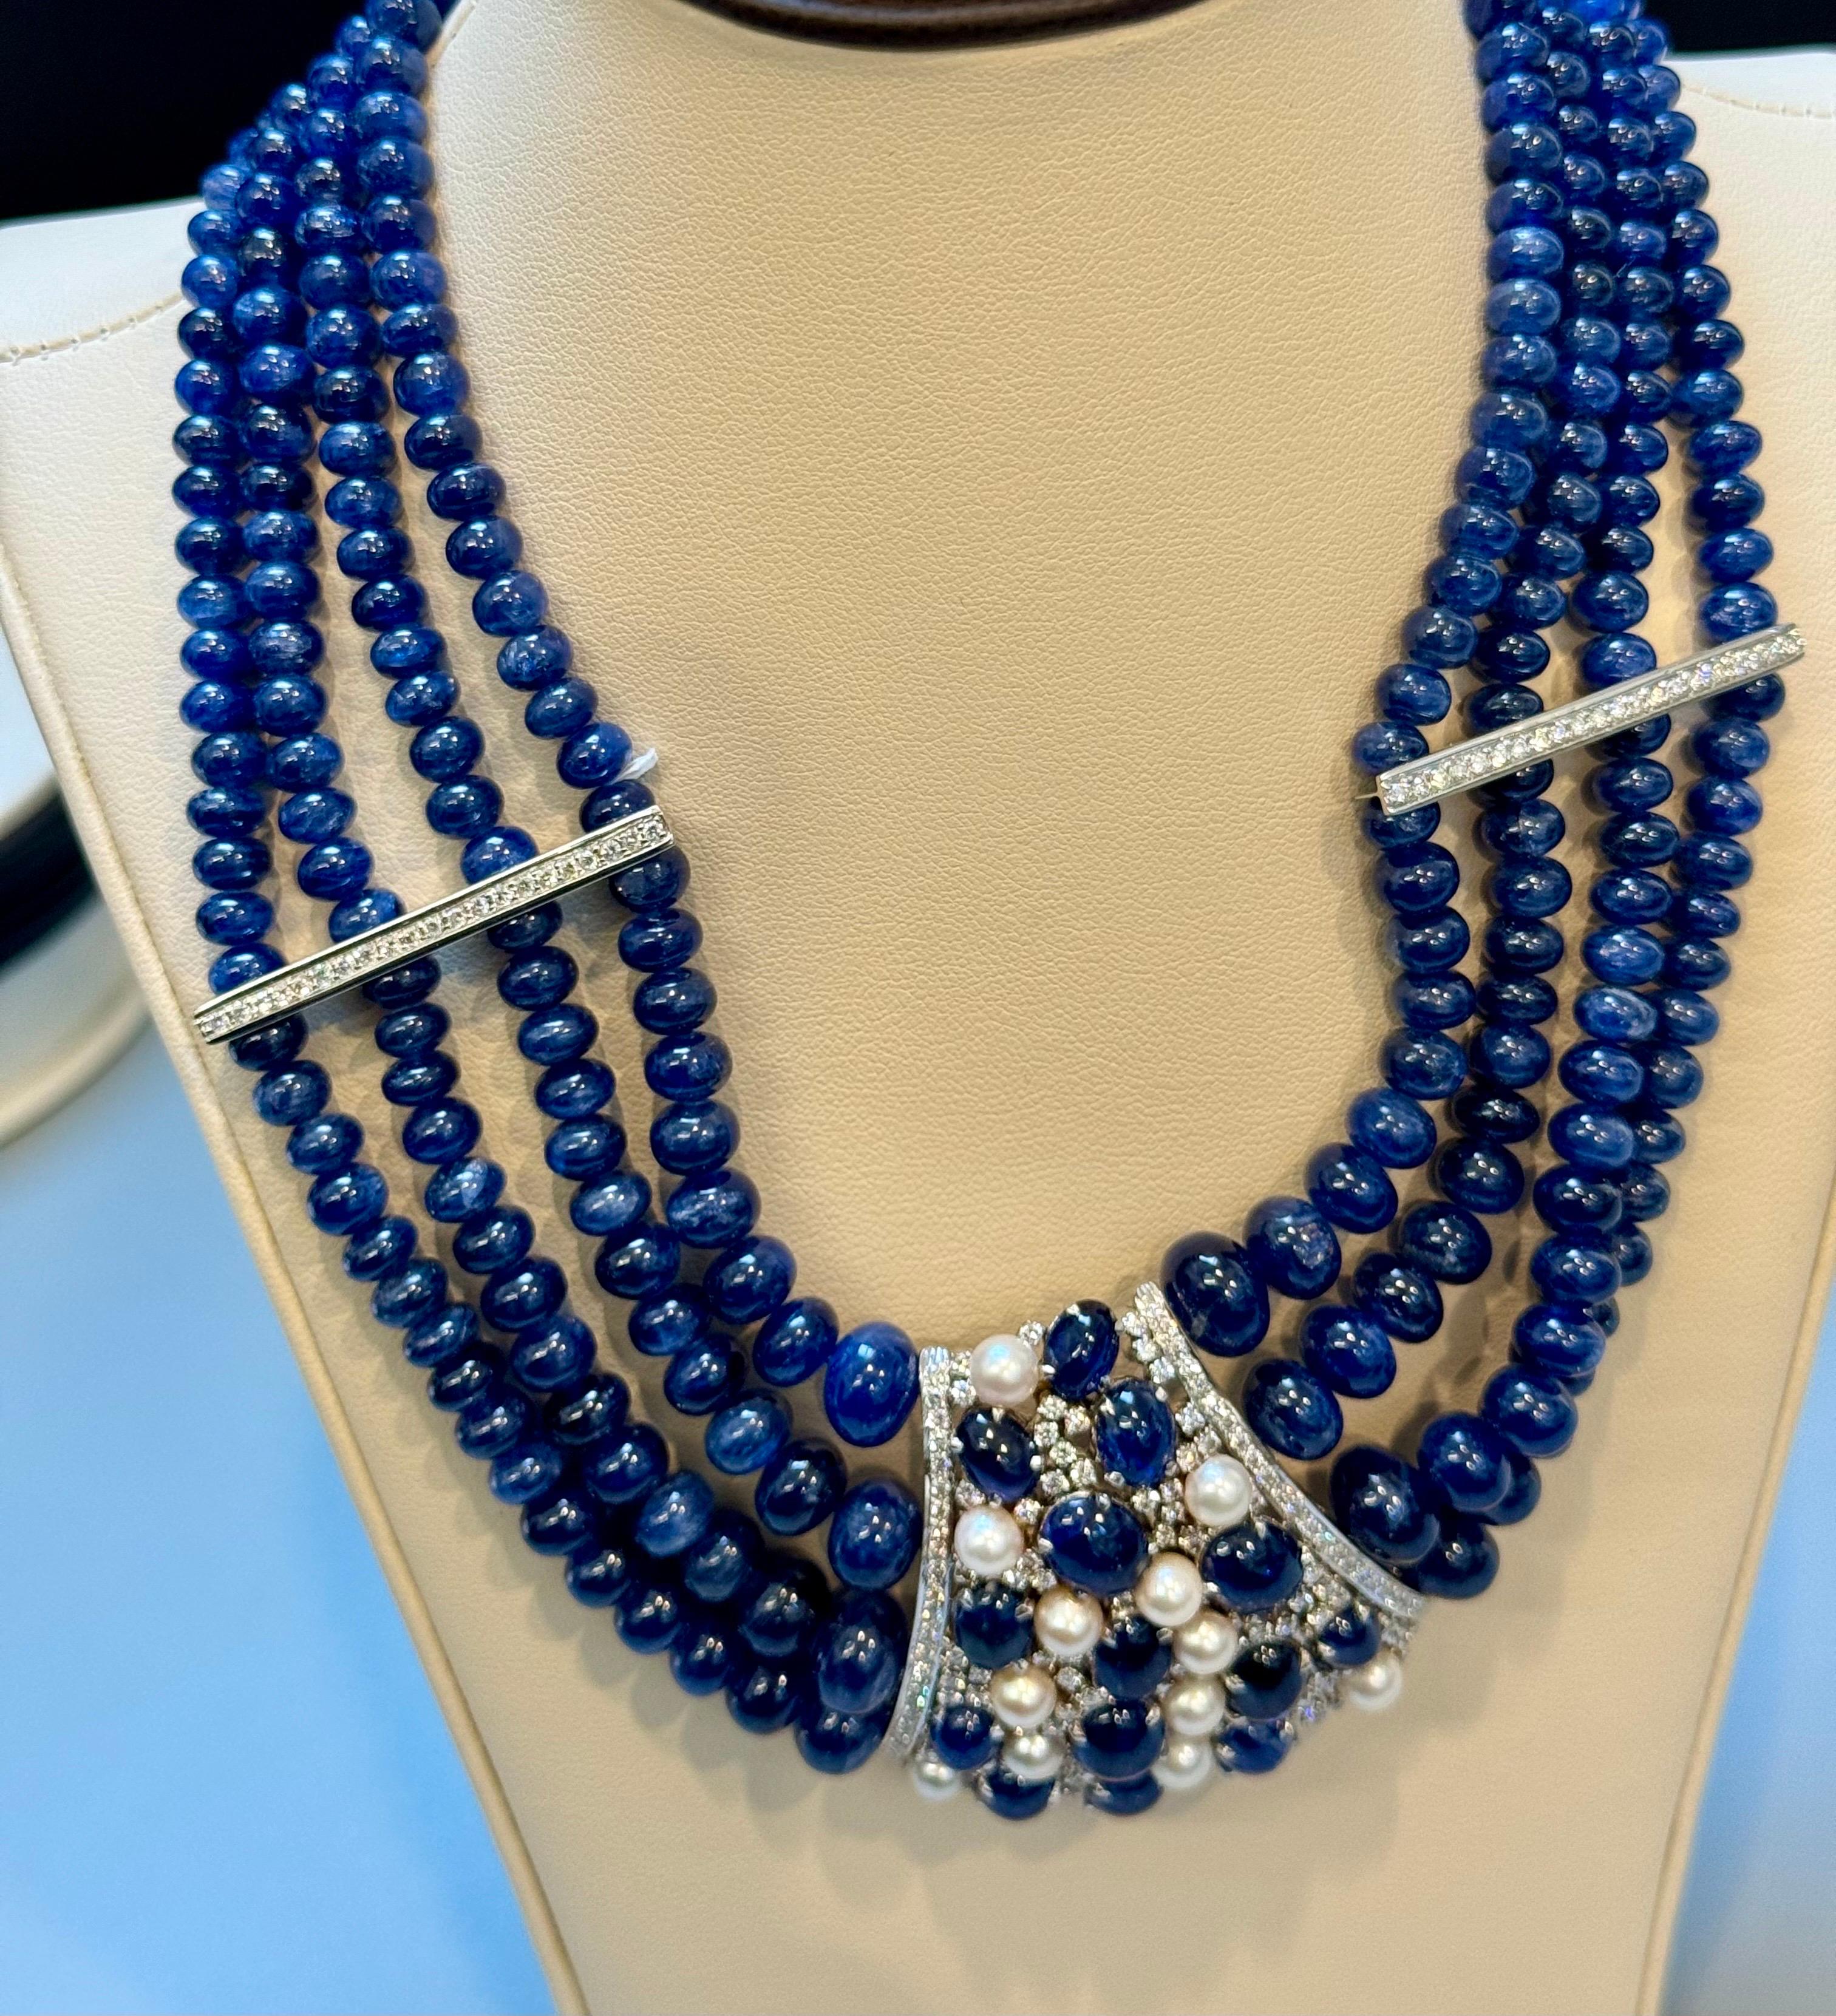 700Ct Sapphire Bead Necklace with cabochon & Diamond Center & Diamond Spacer 18K For Sale 1